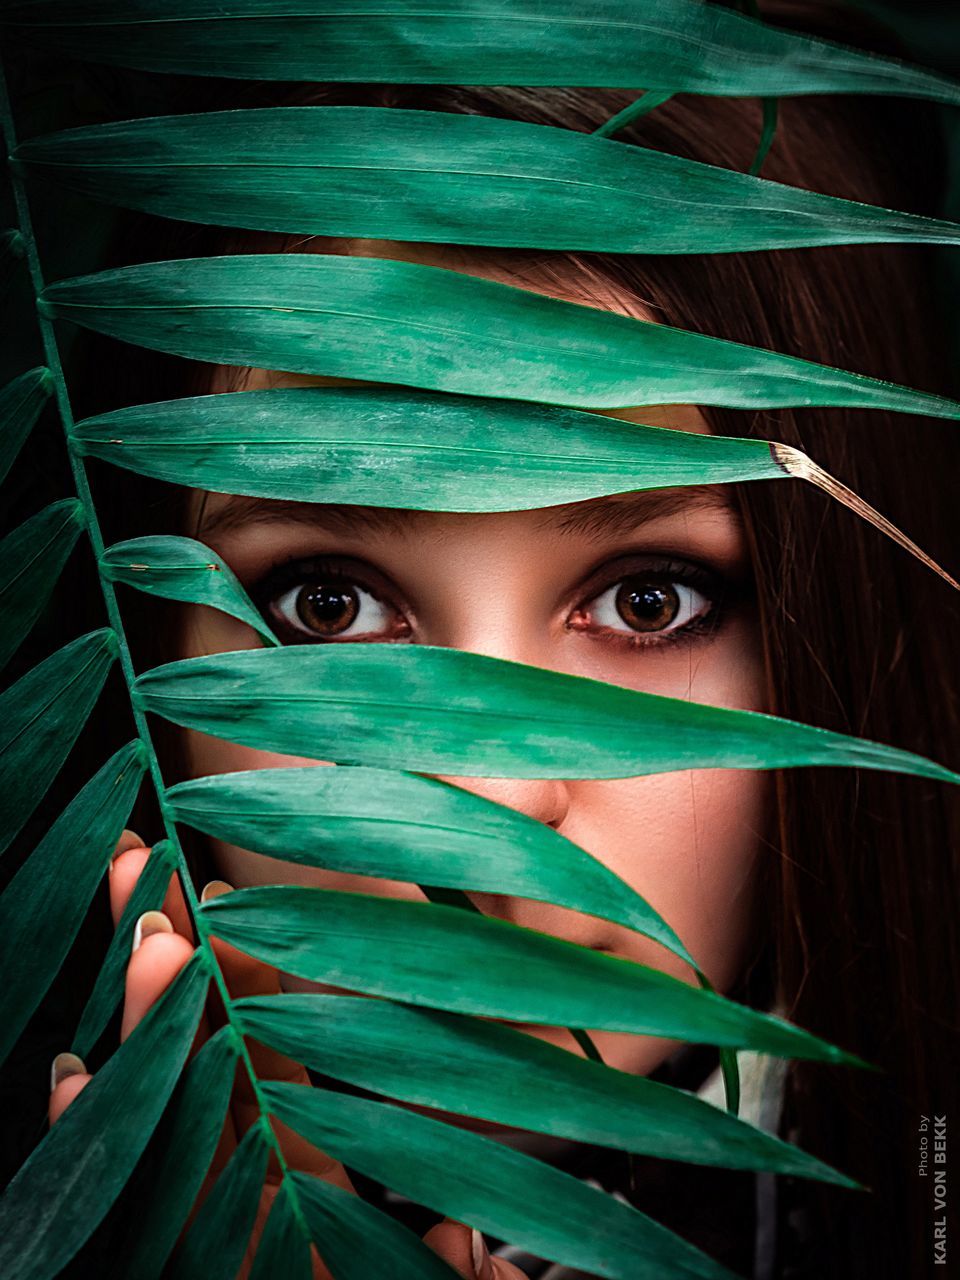 Welcome to the jungle Jungle Palm Palm Leaf Green Color Human Face Adult Women Portrait Human Body Part Young Adult Looking At Camera Young Women One Person Females Beautiful Woman Body Part Covering Hiding Eye Emotion Human Eye Dark Peeking